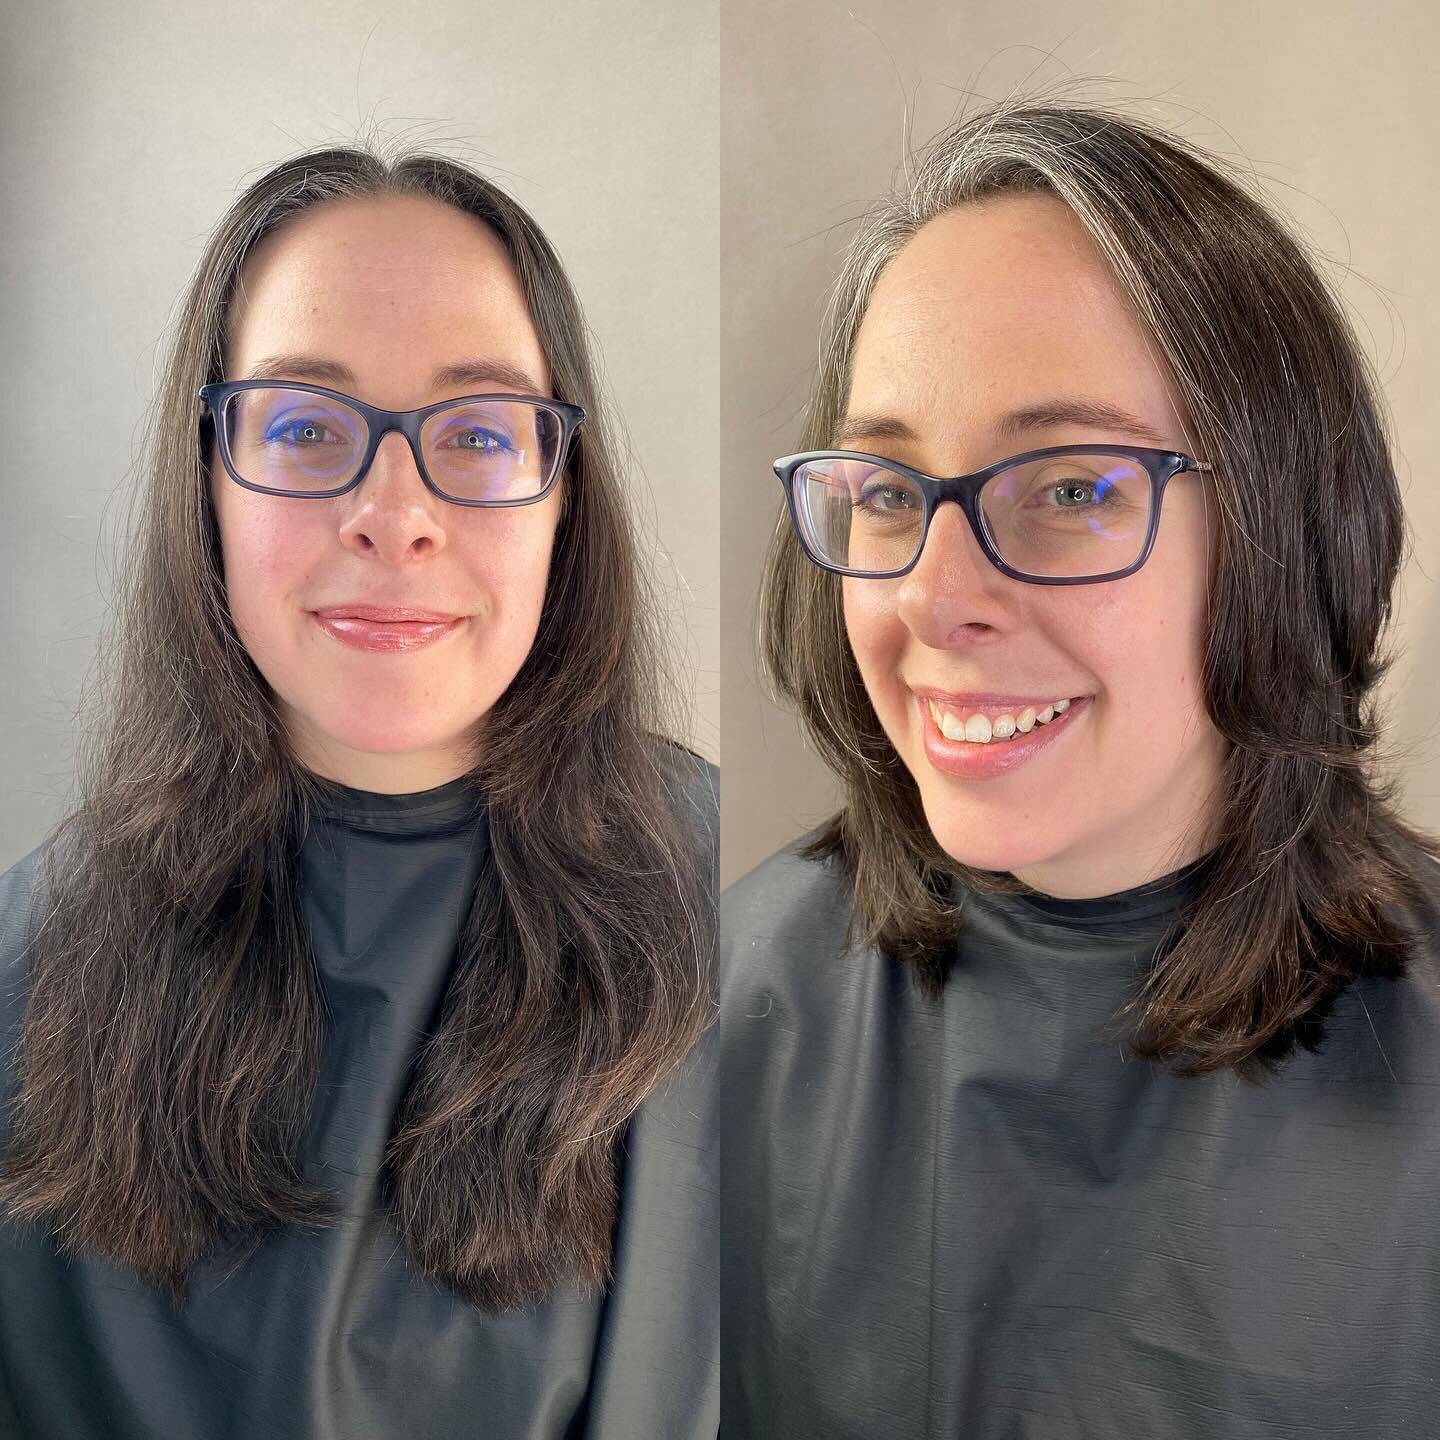 Before &amp; After 
On my beautiful sister! Love having family in my chair 💕
.
.
.
#shorthaircut 
#layers 
#hairchange 
#beforeandafterhair